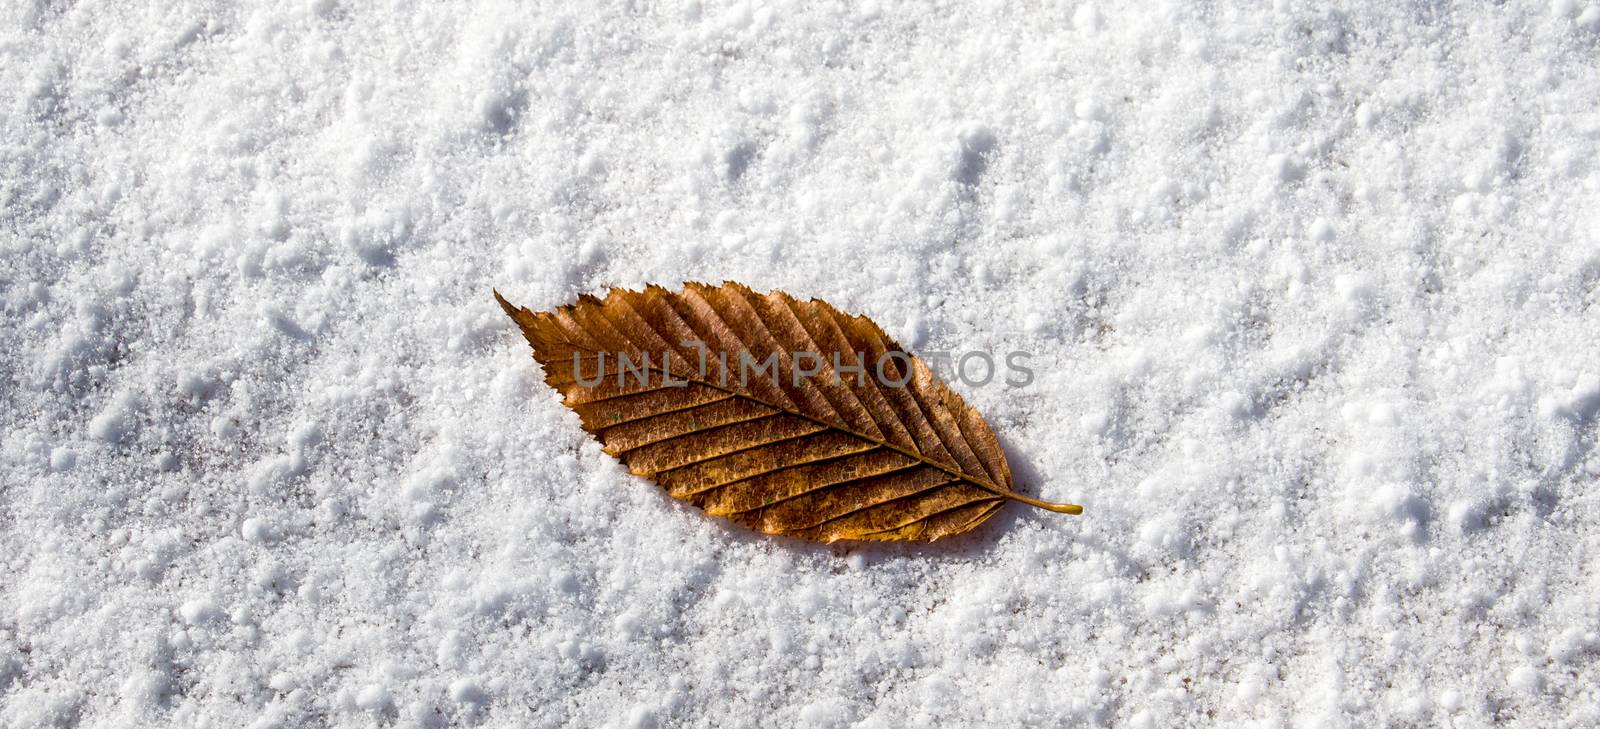 Dry leaf placed  on a white snowy background by berkay